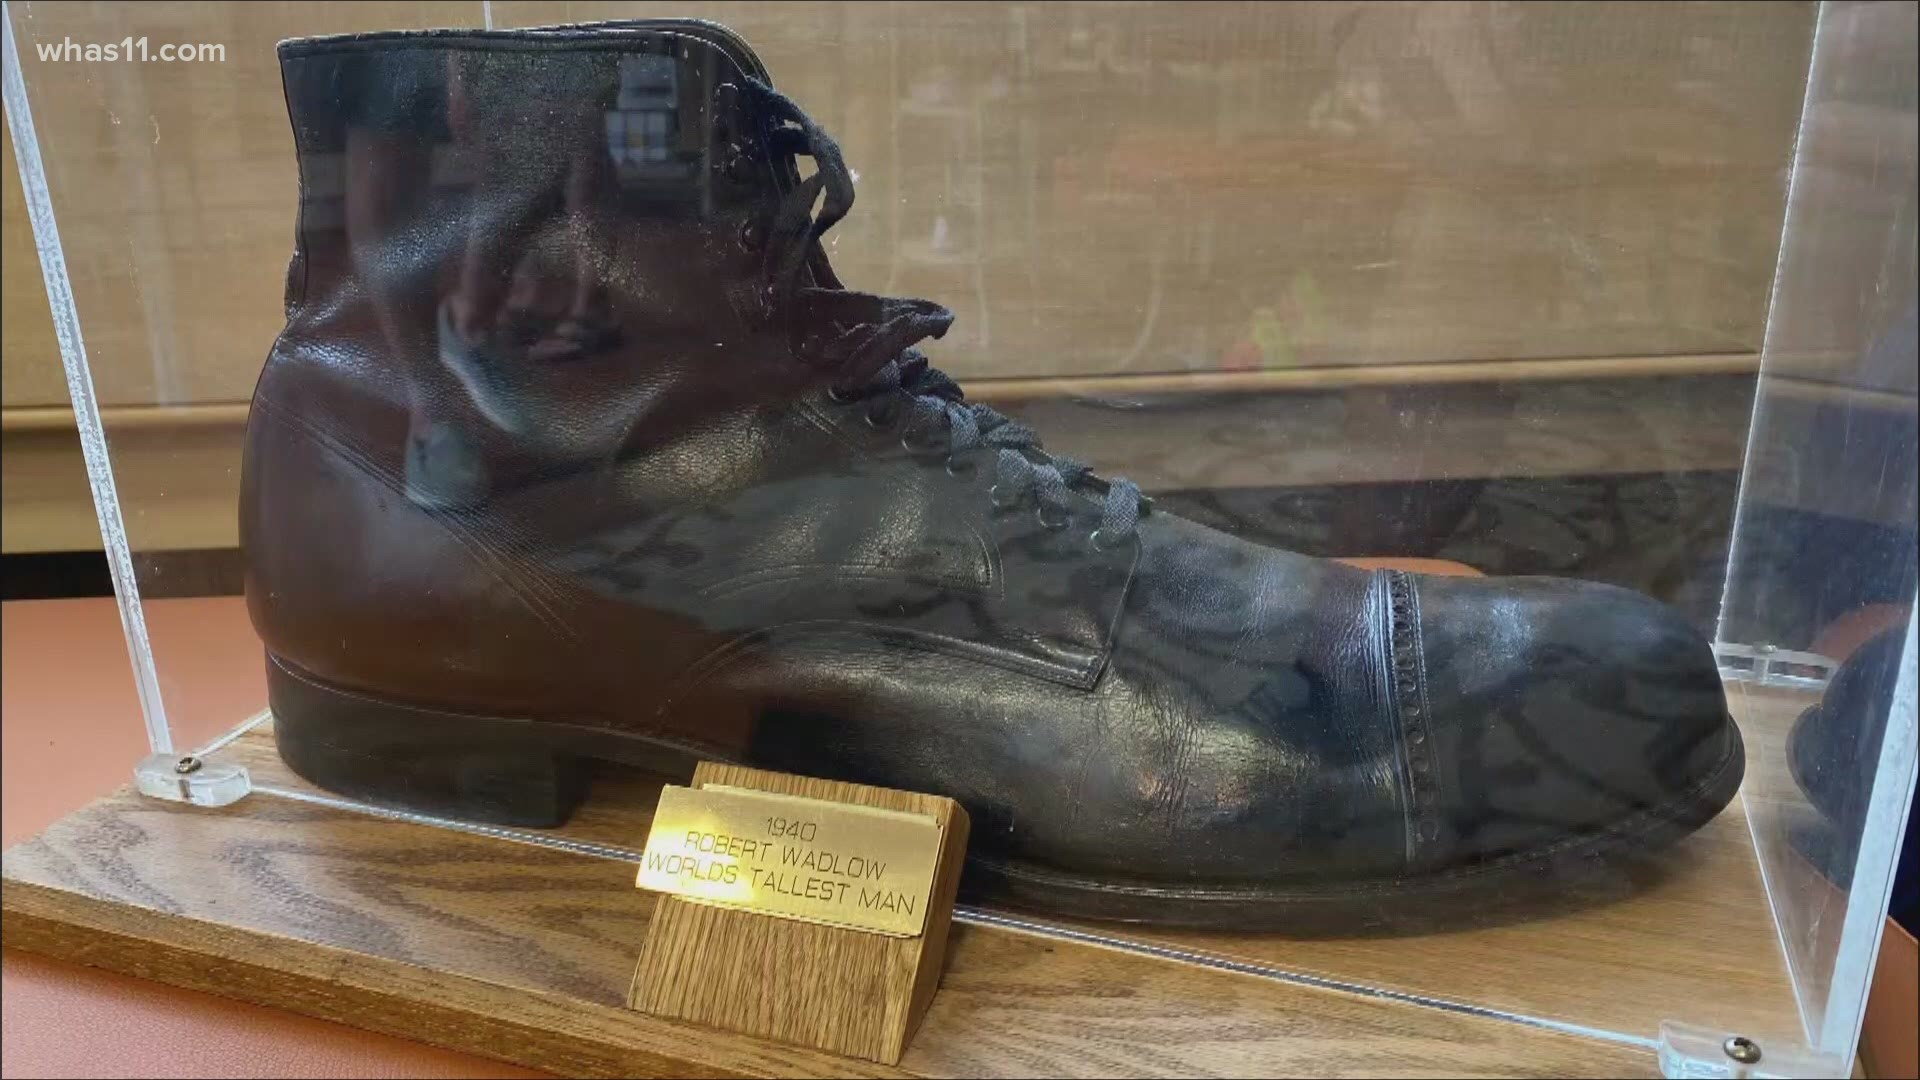 Robert Wadlow stood one inch shy of 9-feet tall at the time of his death in Manistee, Mi. on July 15, 1940. Snyder's Shoes has a 'Wadlow shrine' on display.